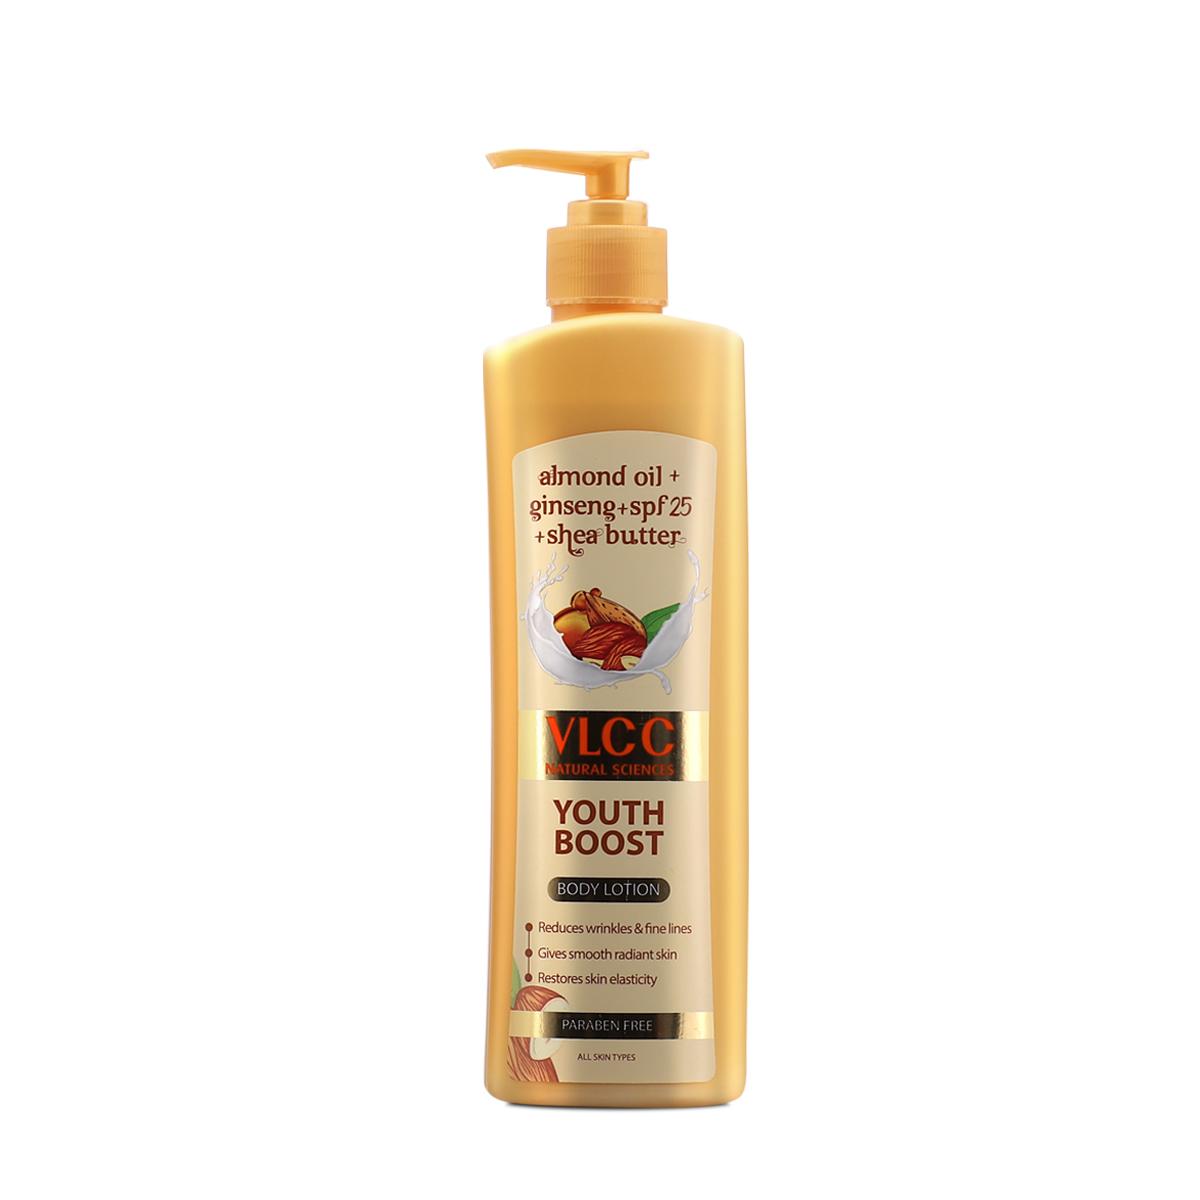 Protect and Nourish Your Skin with VLCC Youth Boost Body Lotion SPF 25 PA+++